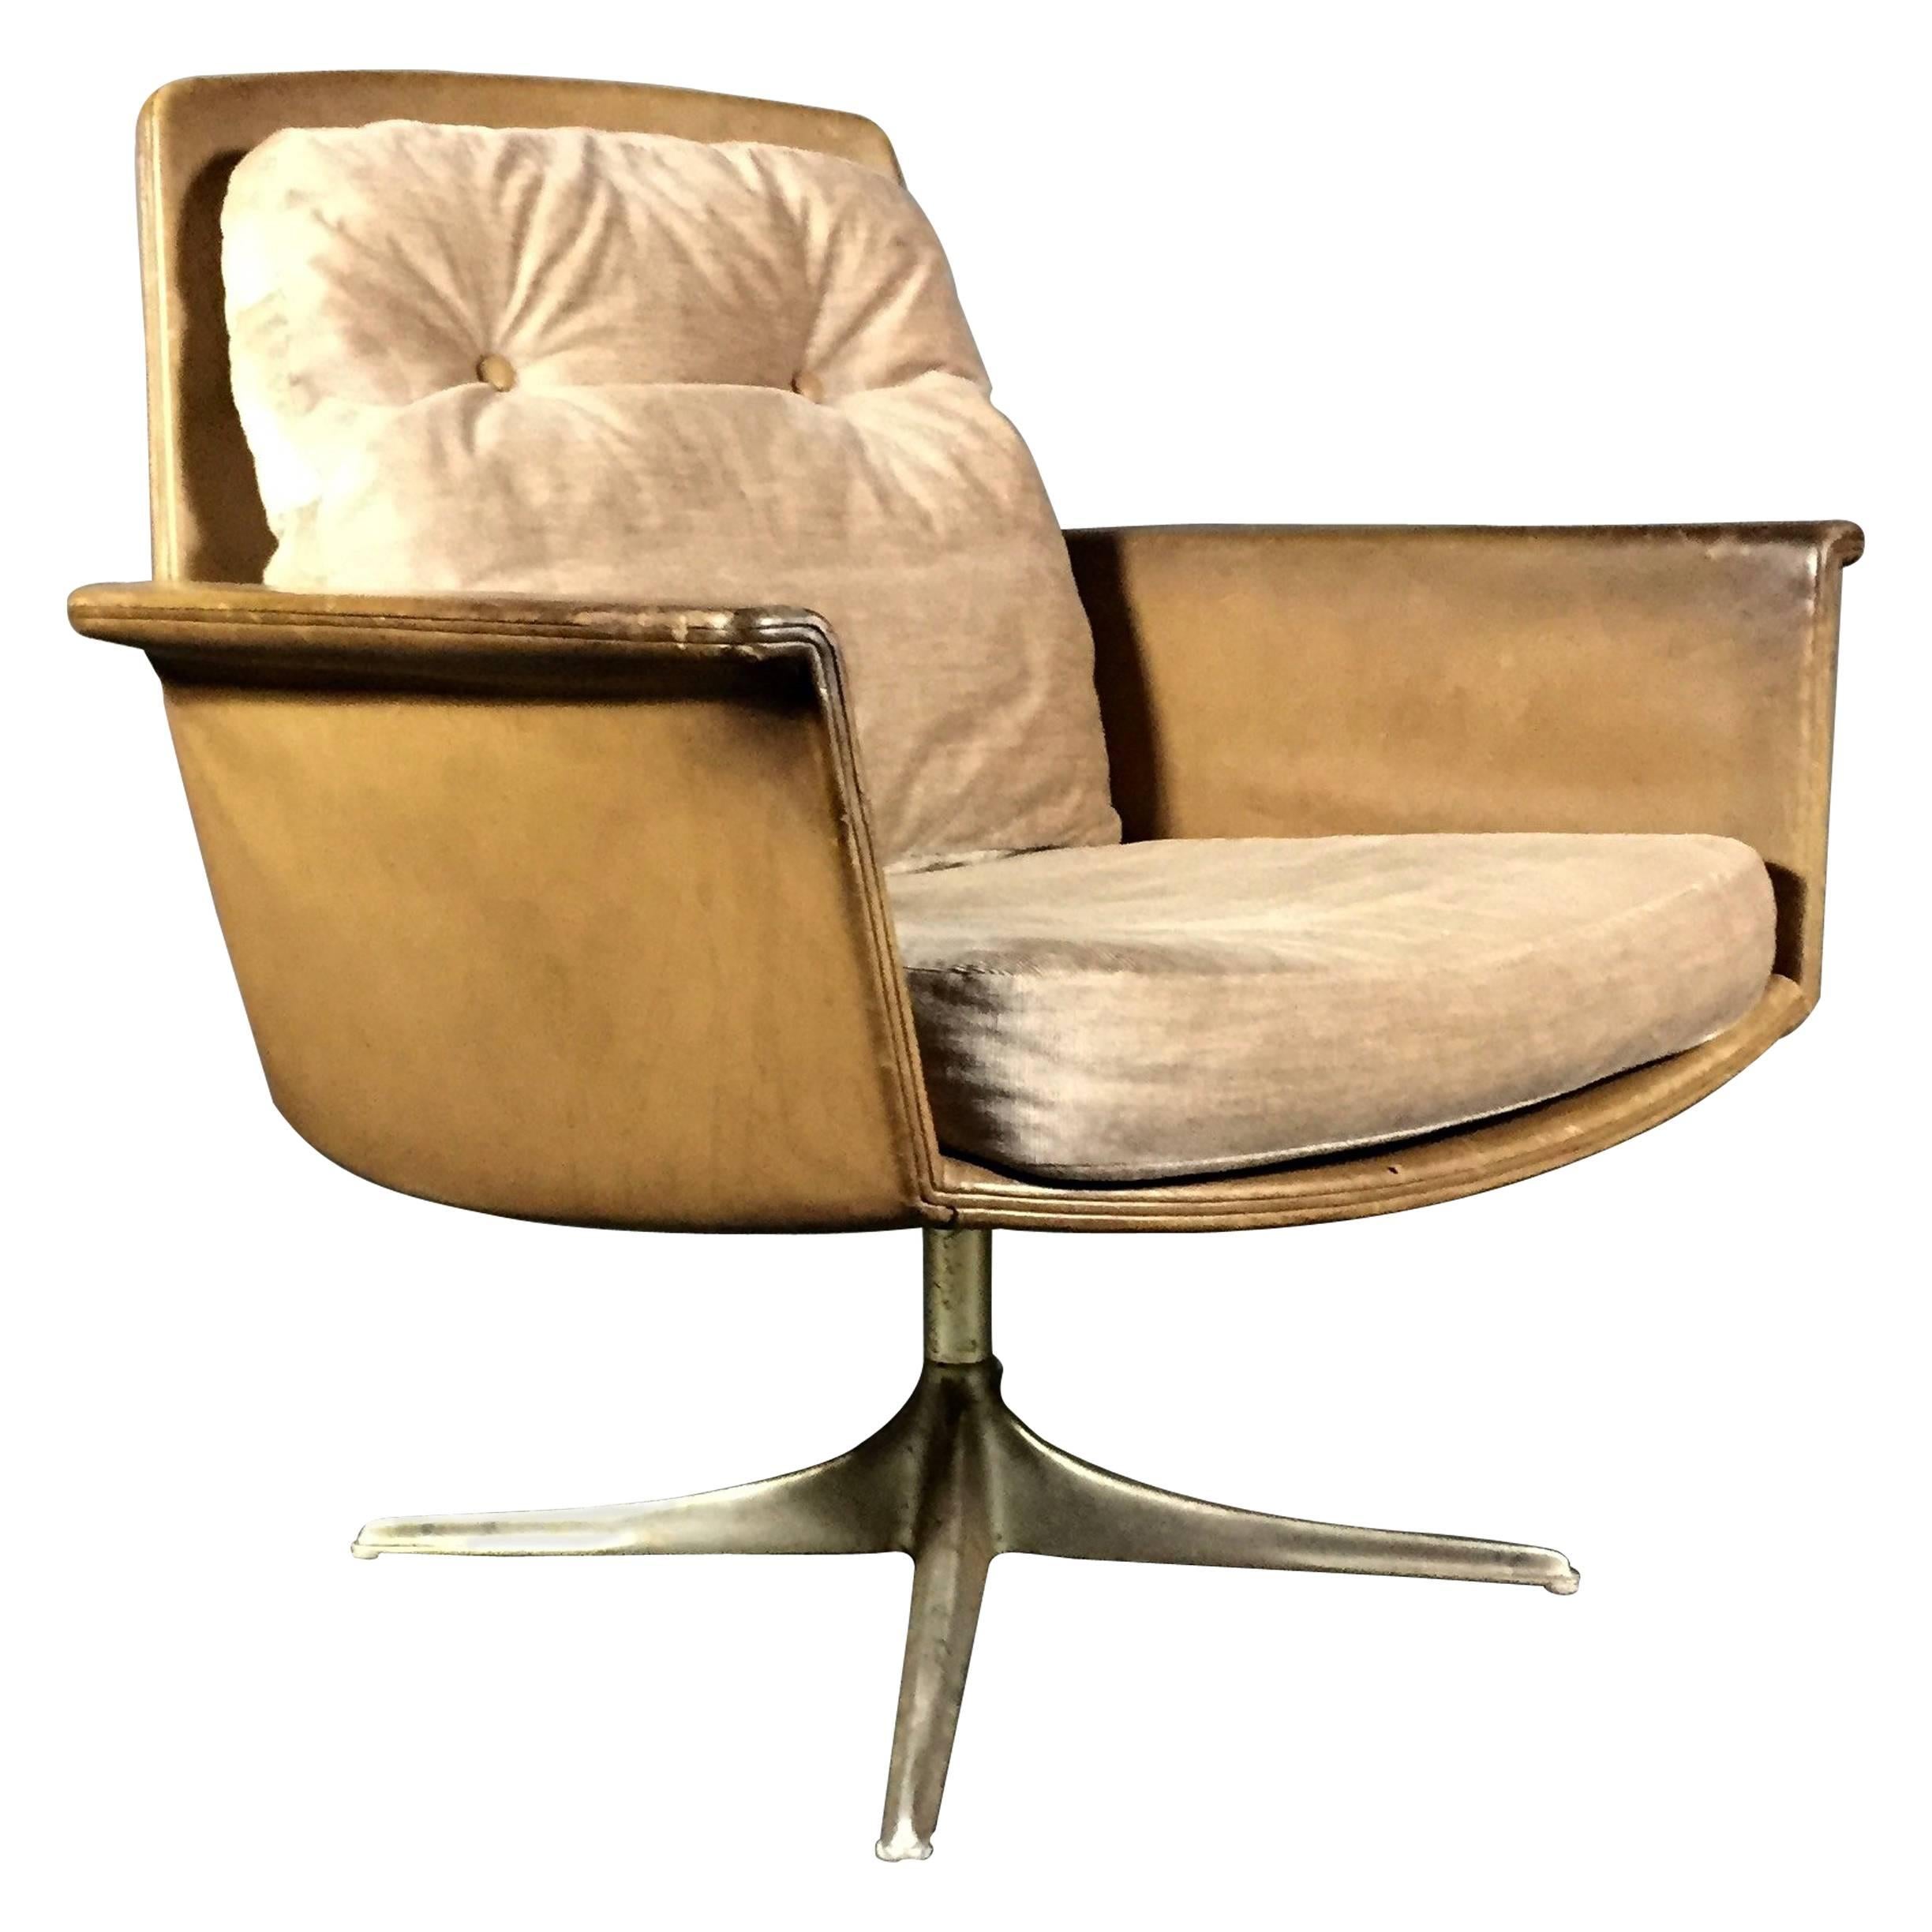 Horst Brüning "Sedia" Leather Chair, for COR Germany, 1966 For Sale